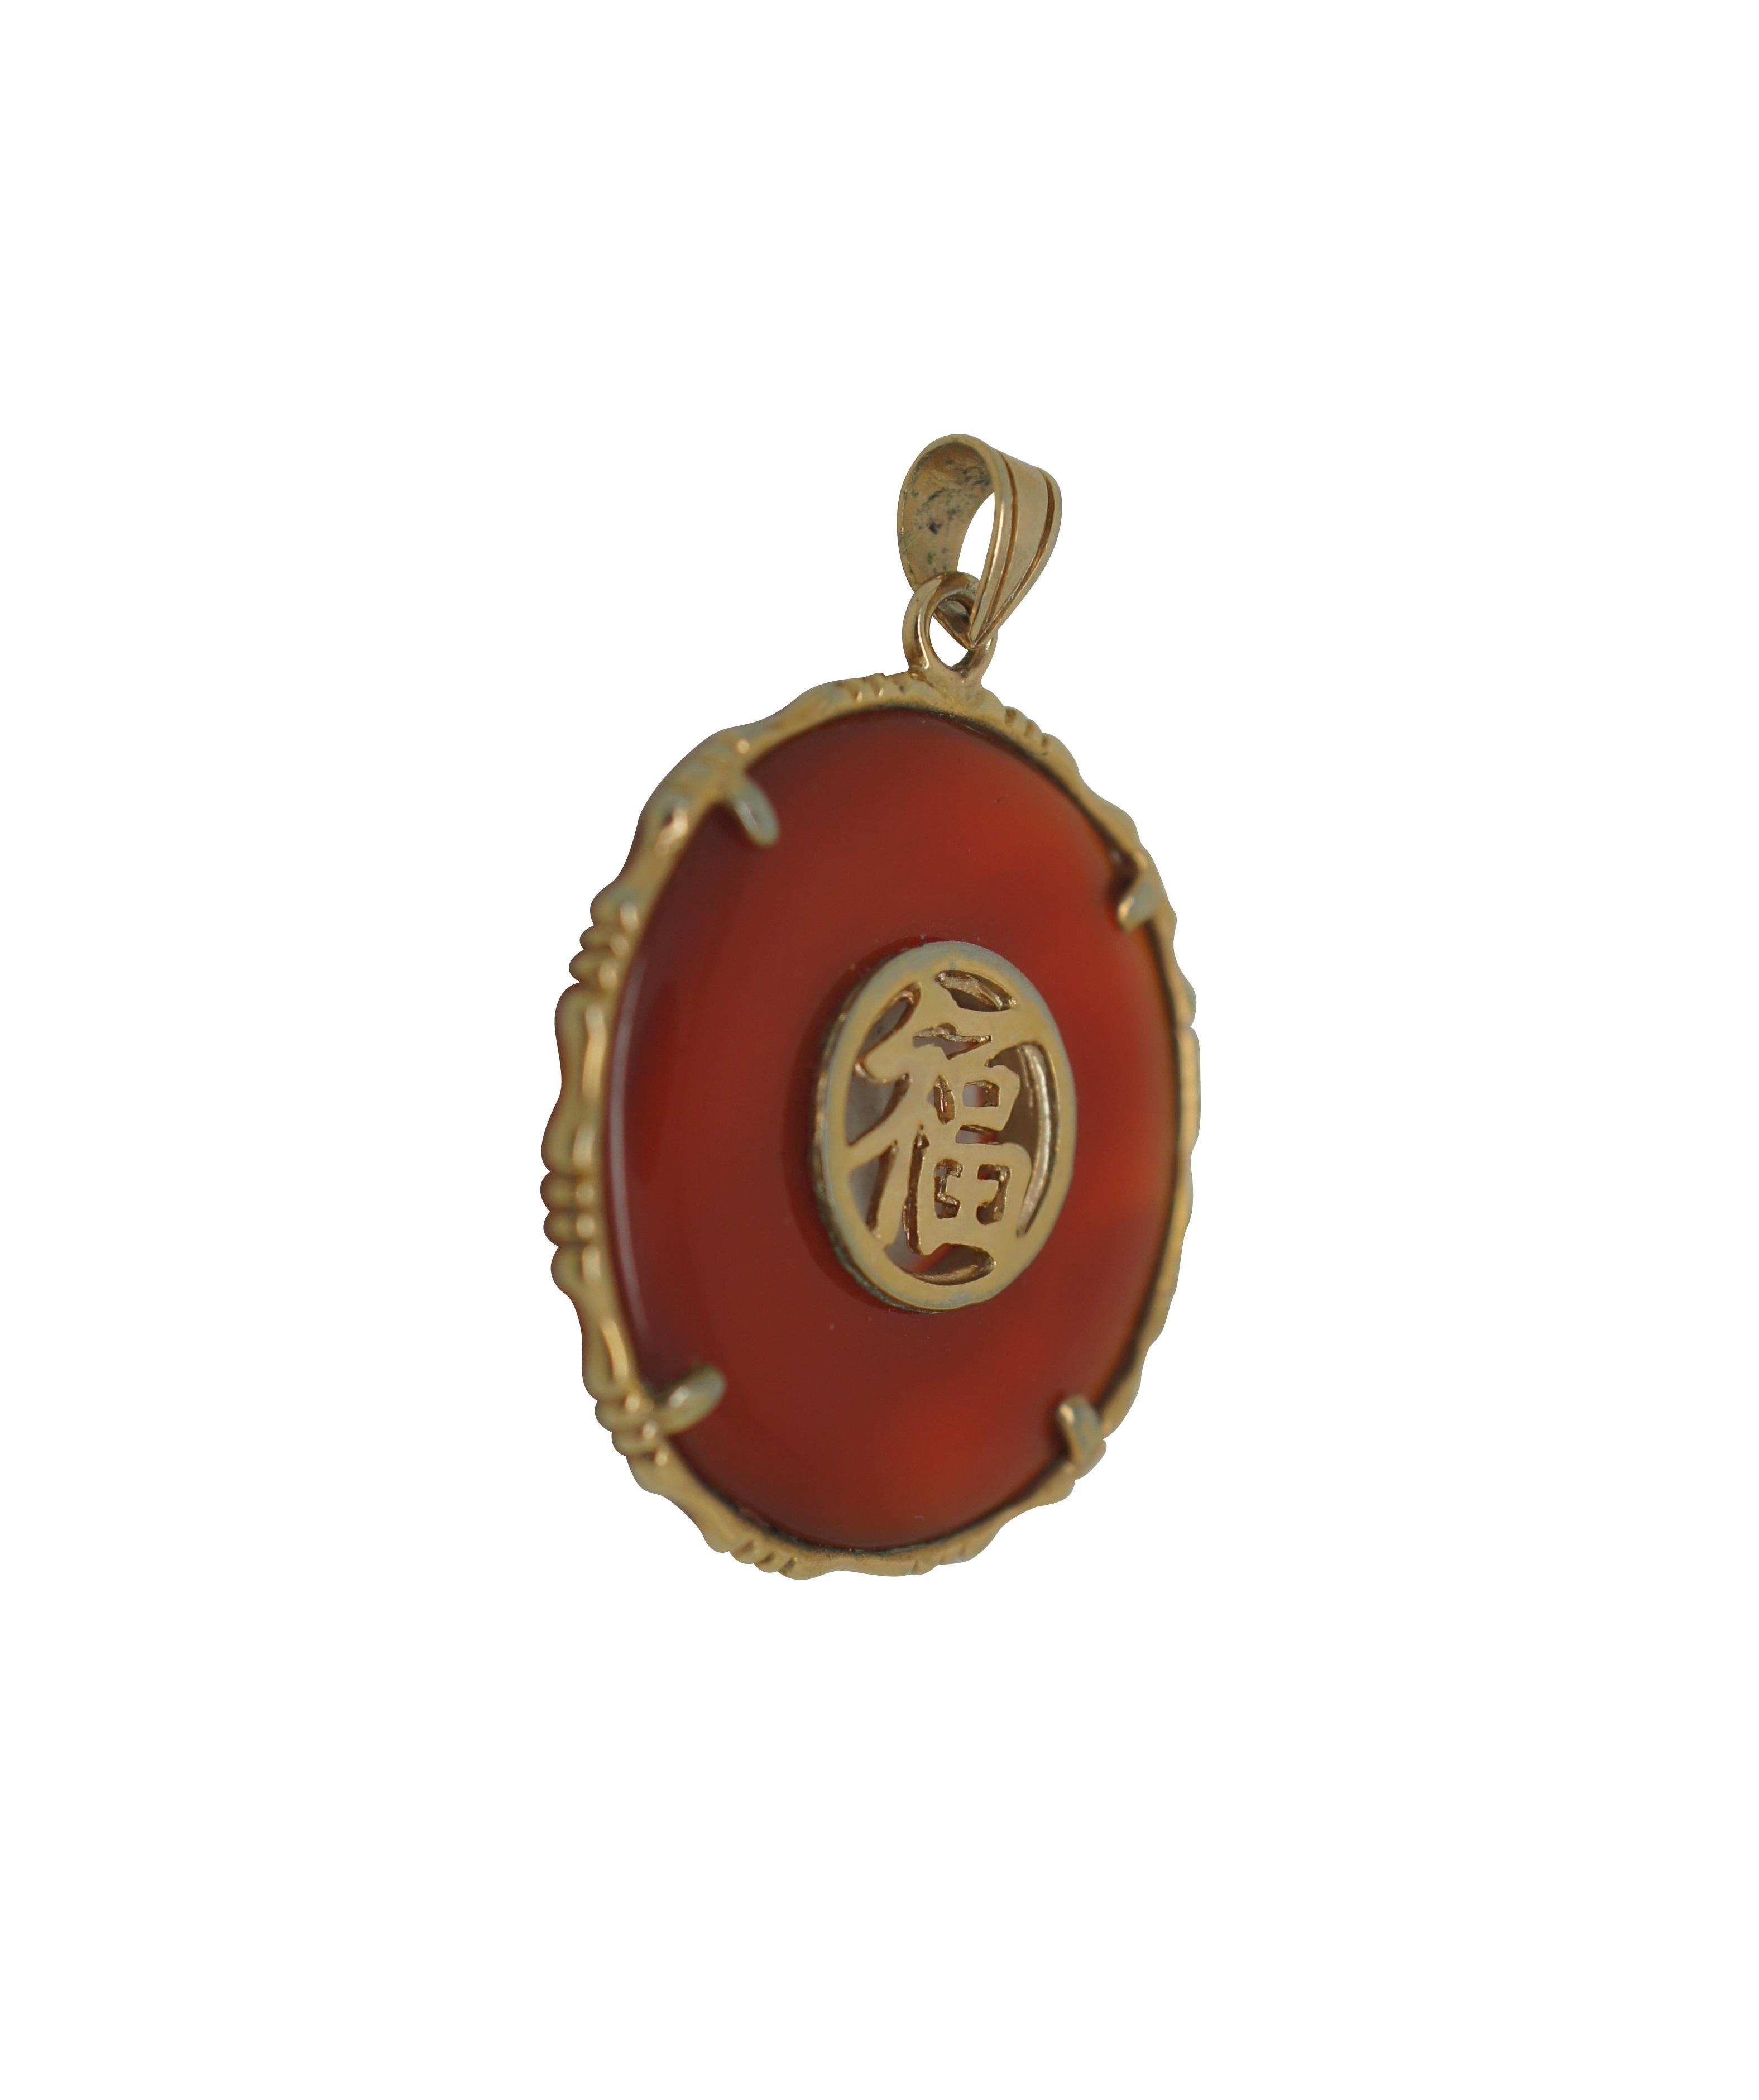 Vintage red jade and gold Chinese Fu symbol (Good Luck, Fortune) medallion disk necklace pendant.

Dimensions:
1.125